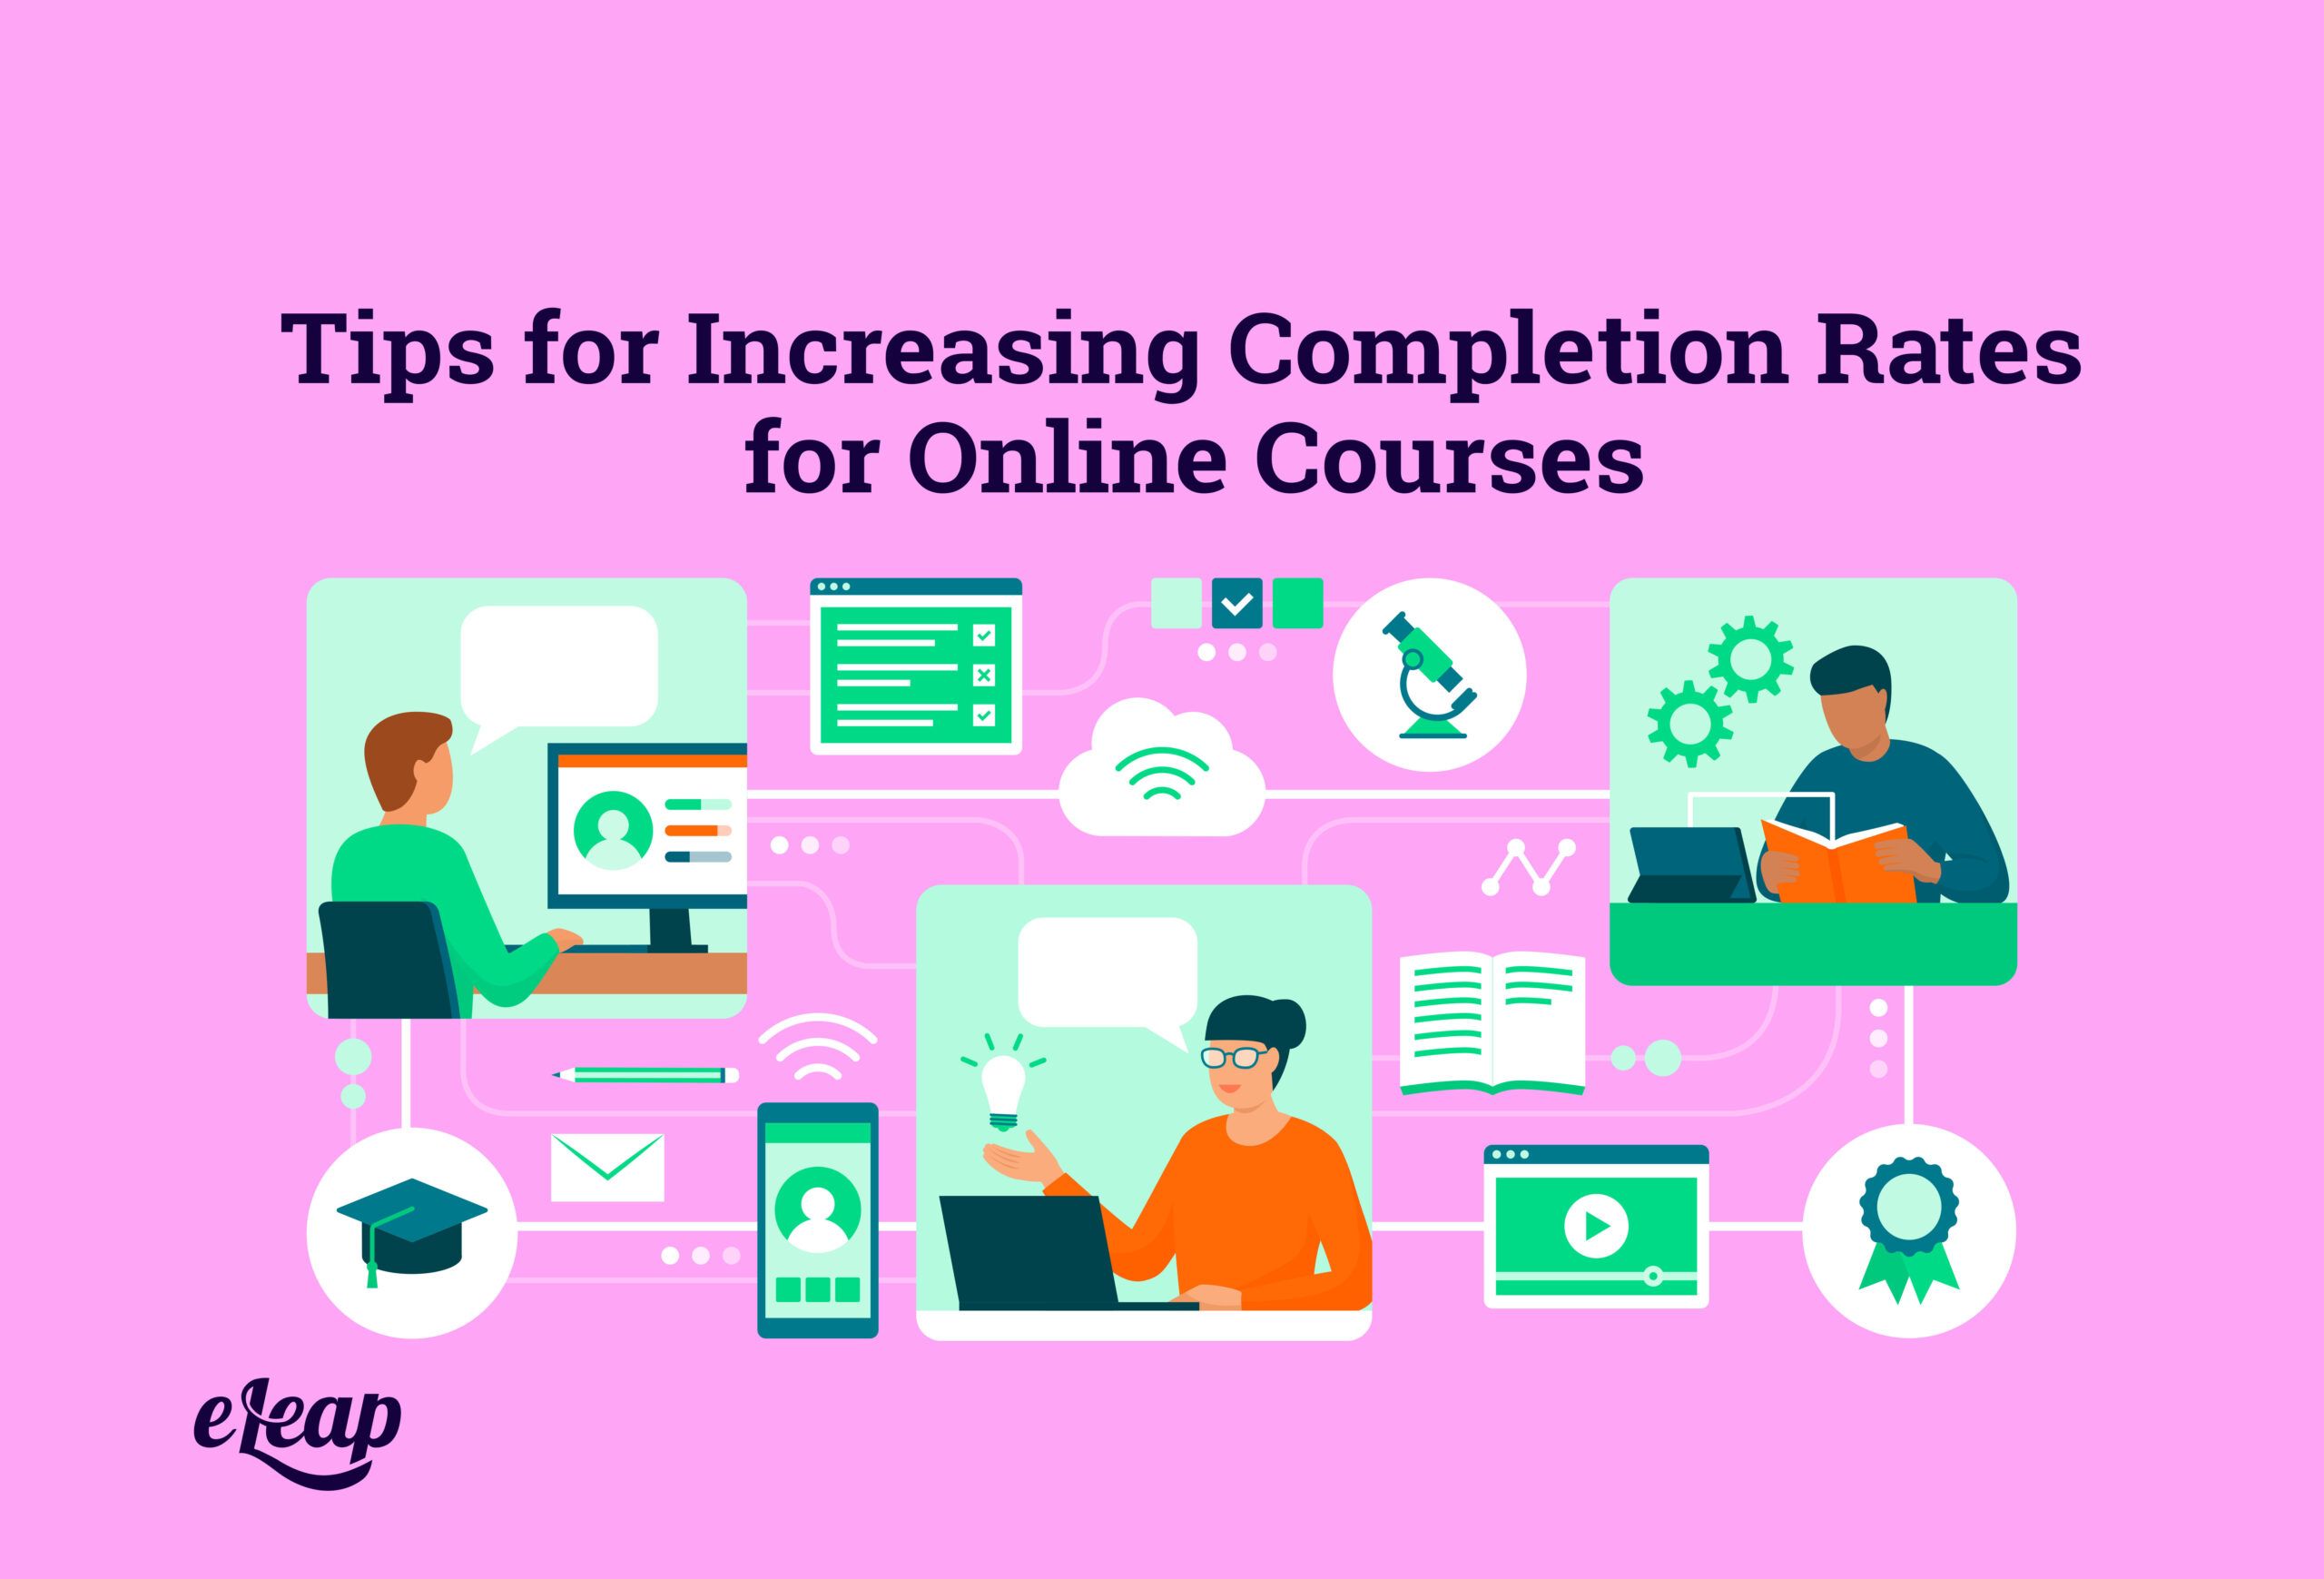 Tips for Increasing Completion Rates for Online Courses